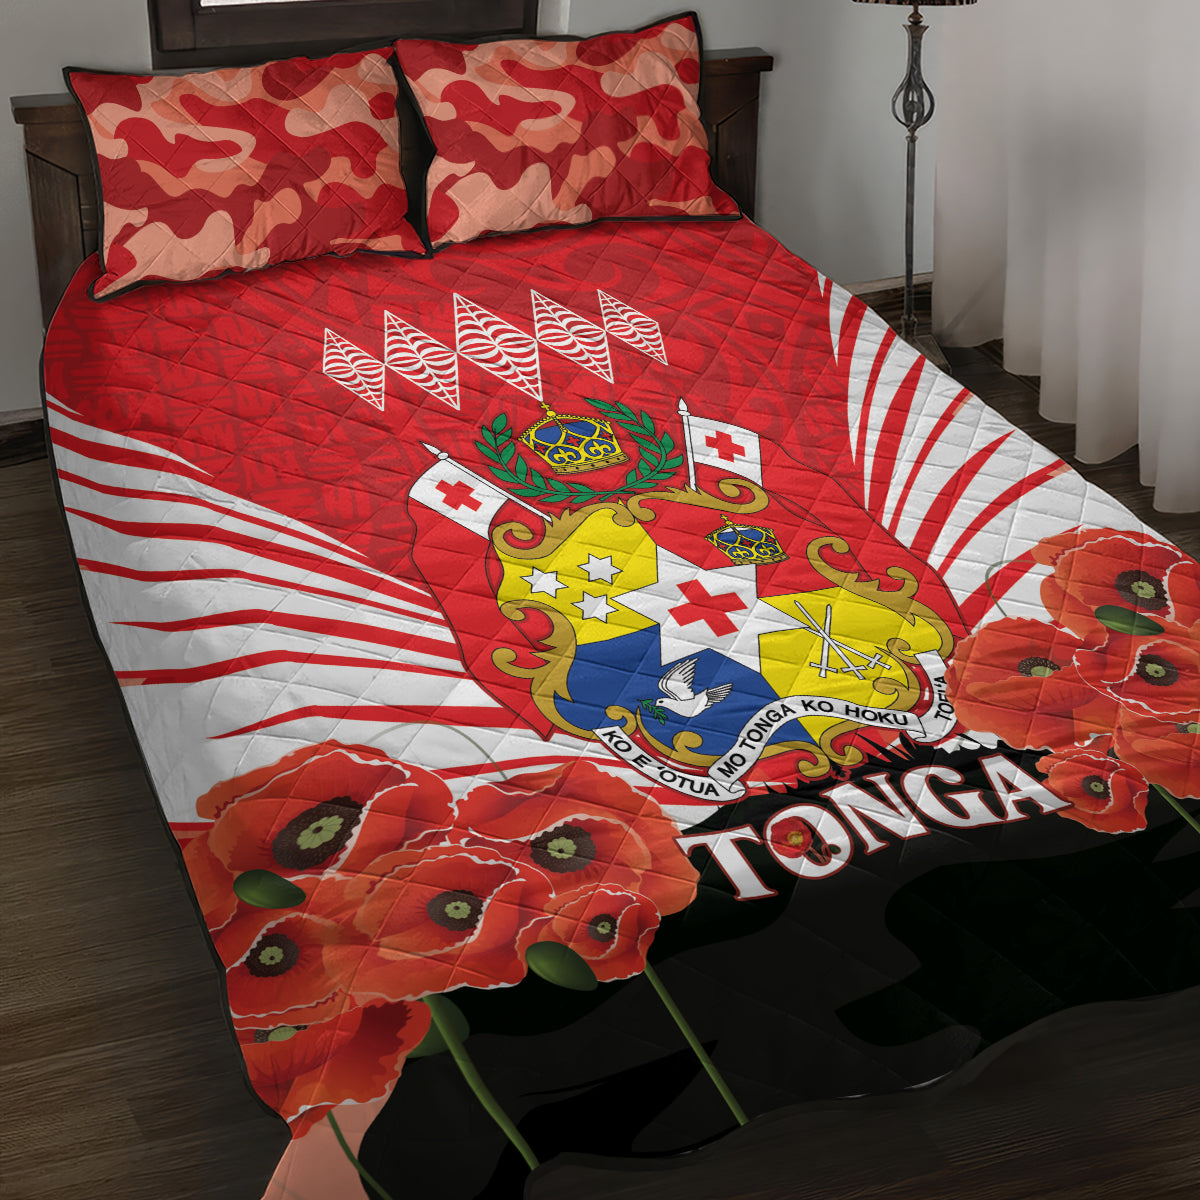 Tonga ANZAC Day Quilt Bed Set Camouflage With Poppies Lest We Forget LT14 Red - Polynesian Pride